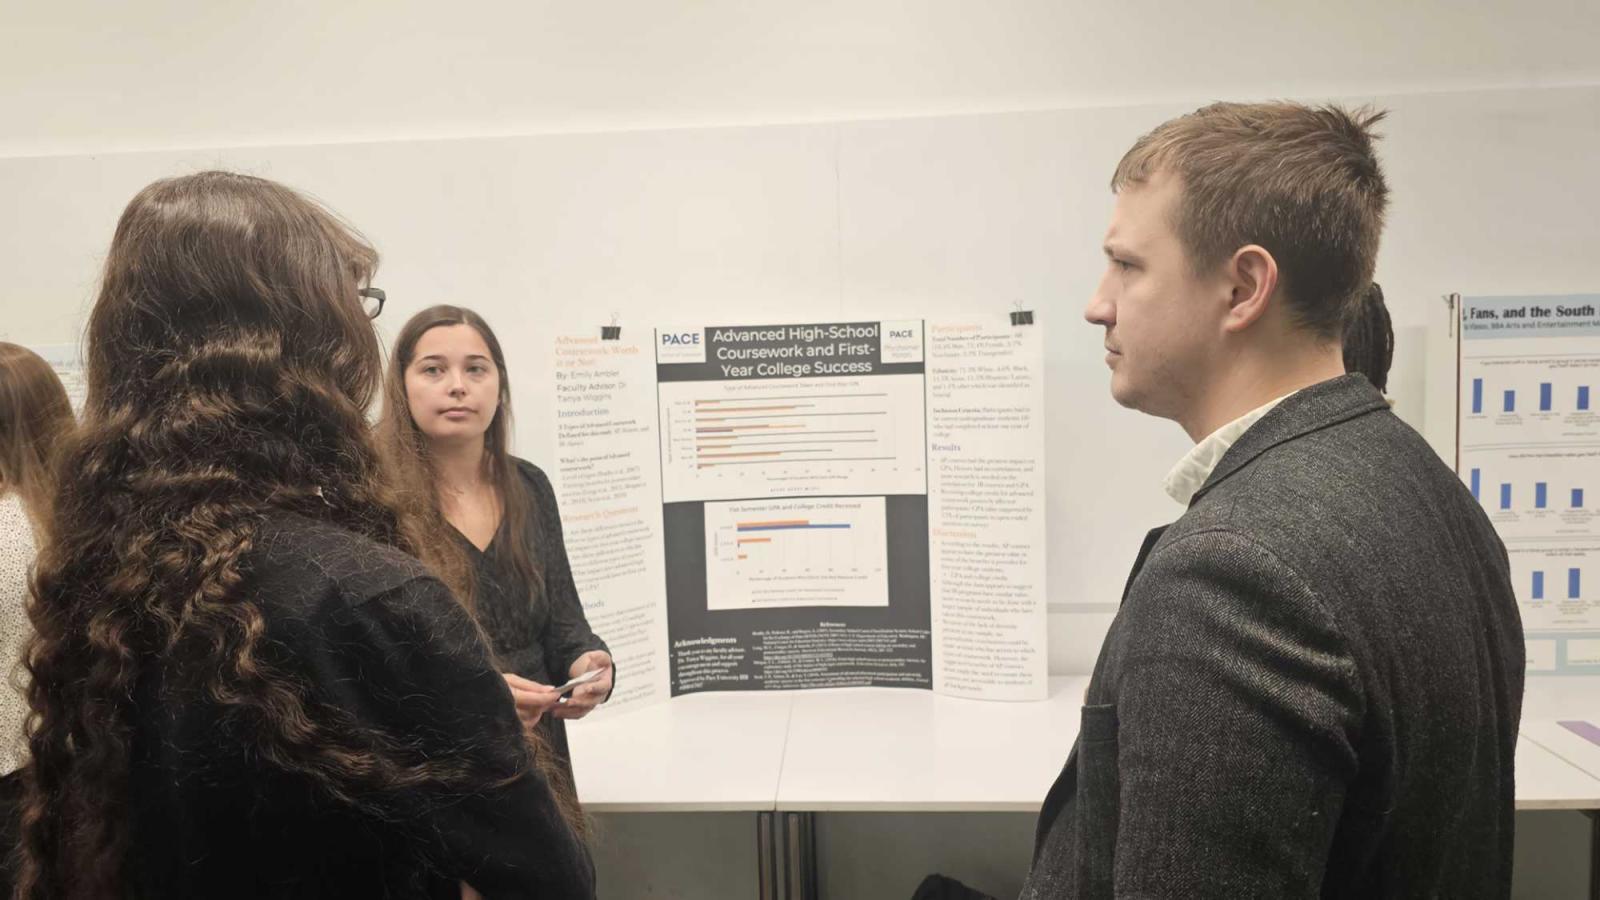 Pace University honors students discussing/presenting research 